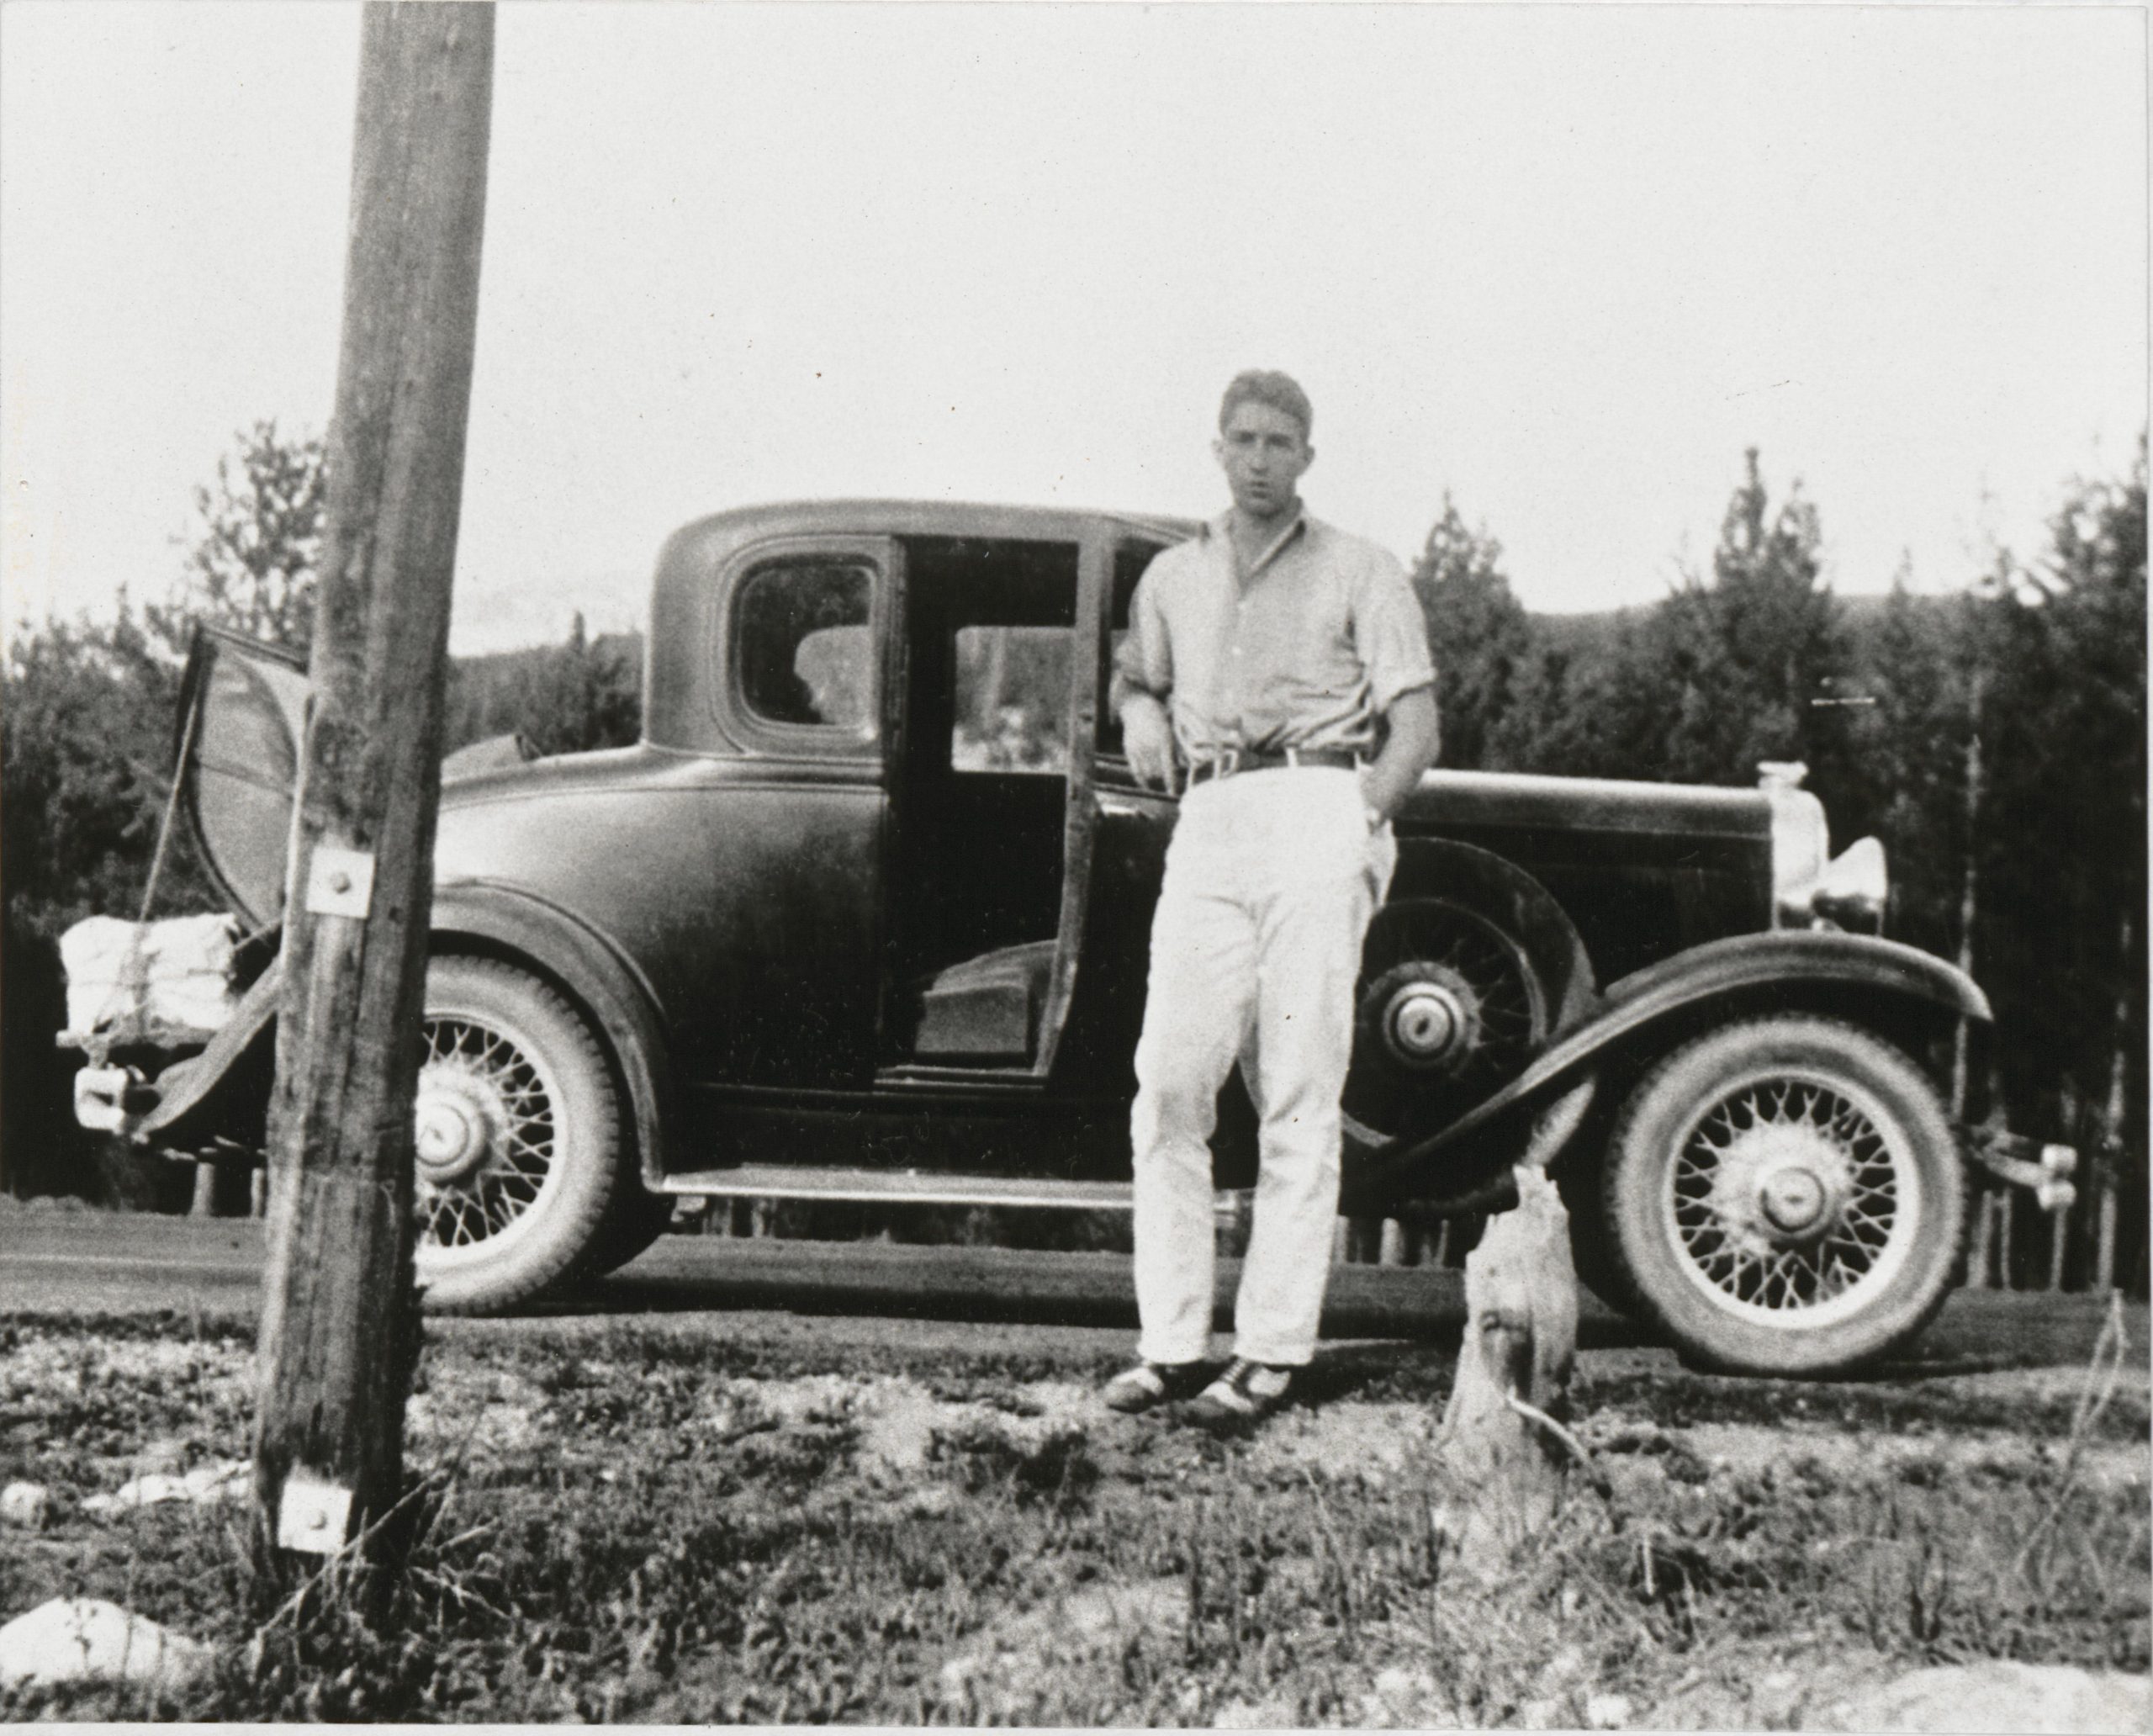 Dave Packard as a young man posing beside a car.